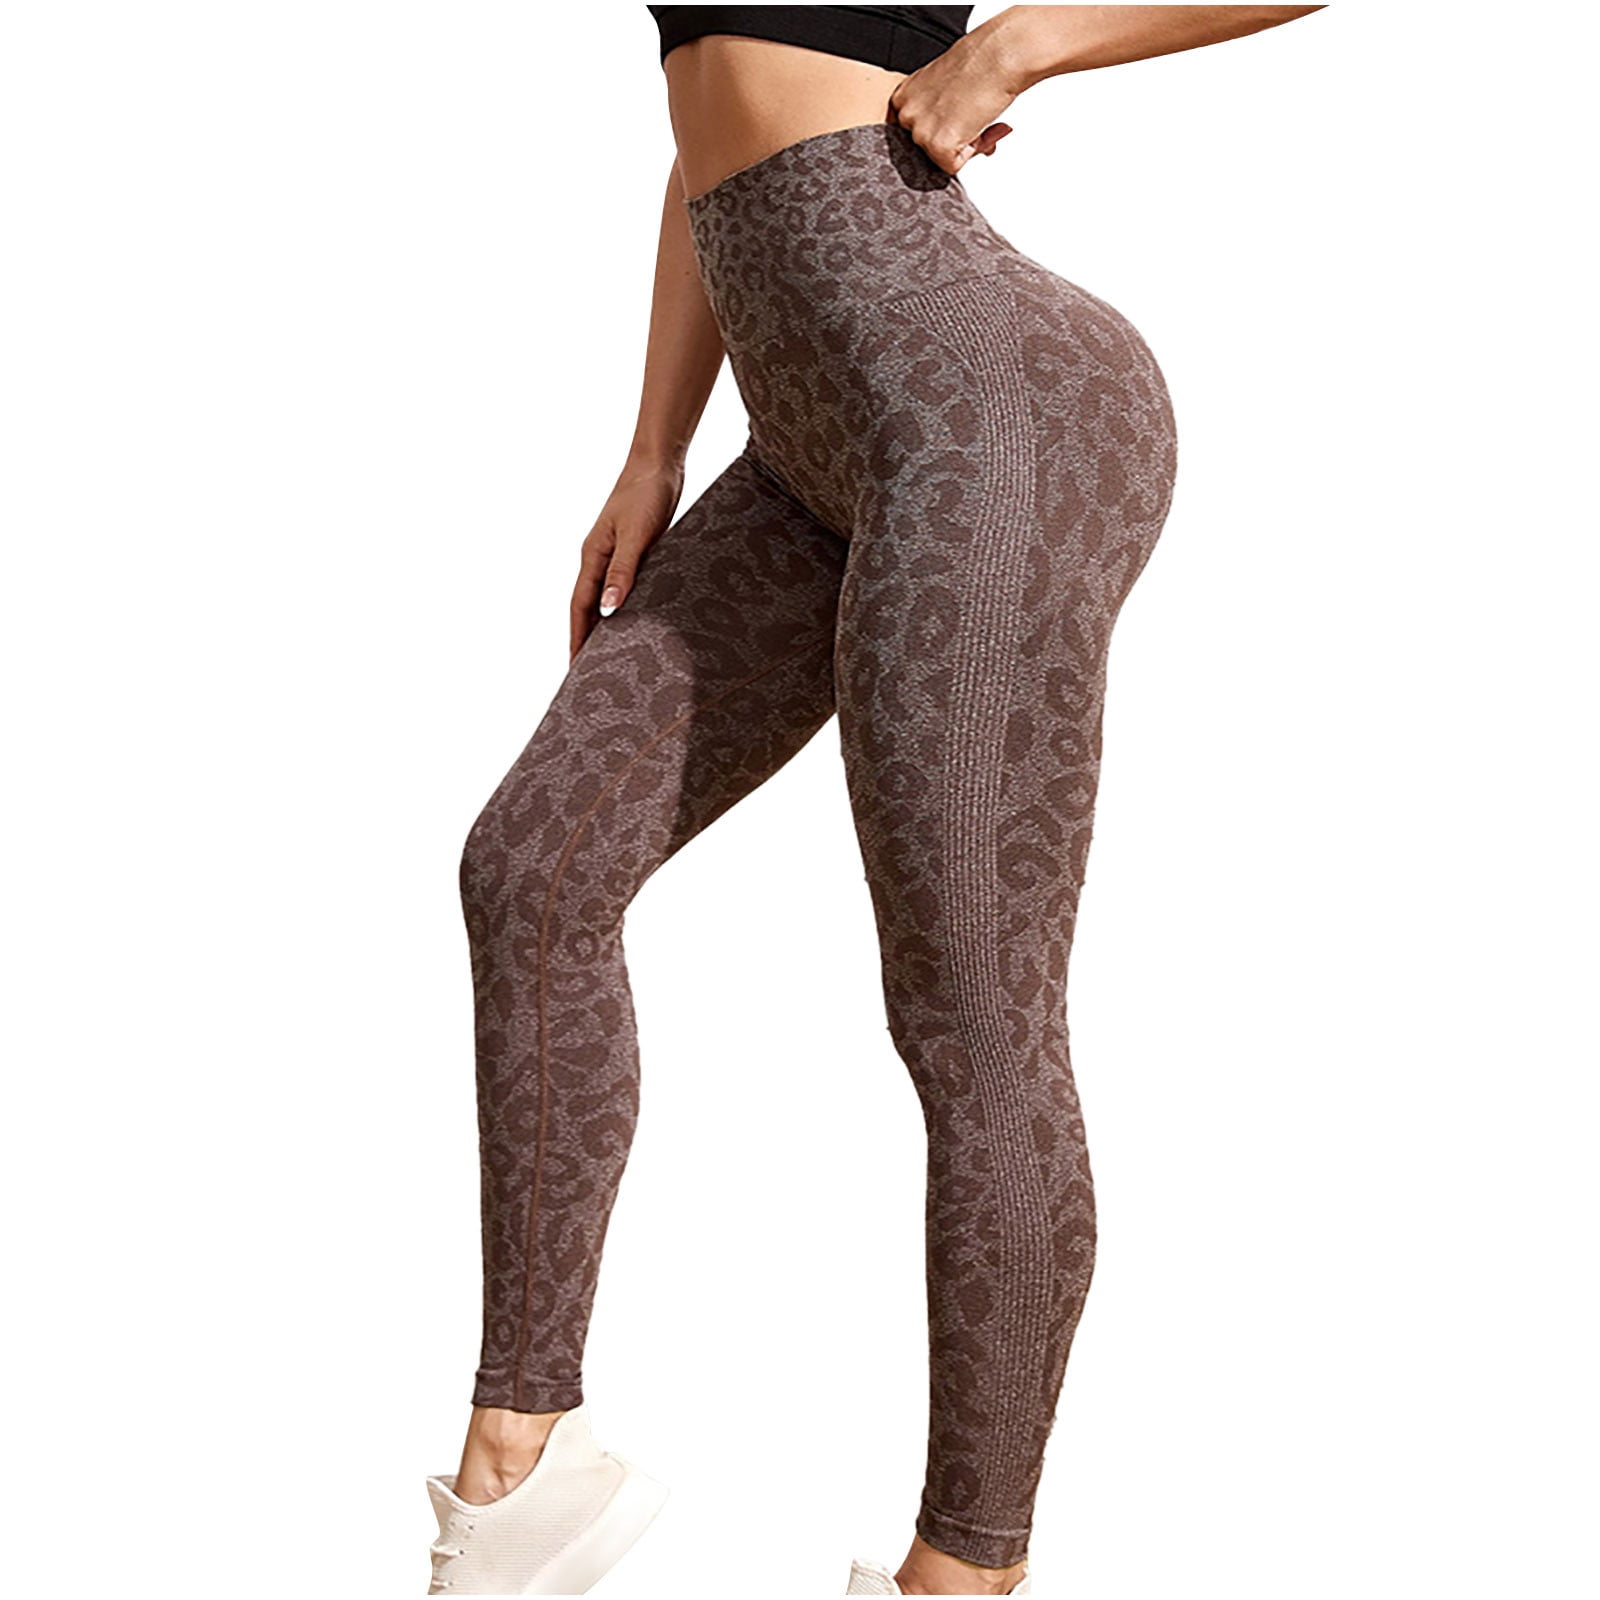 YYDGH Women Scrunch Butt Lifting Leggings with Pockets High Waisted Gym Workout  Leggings Black M 